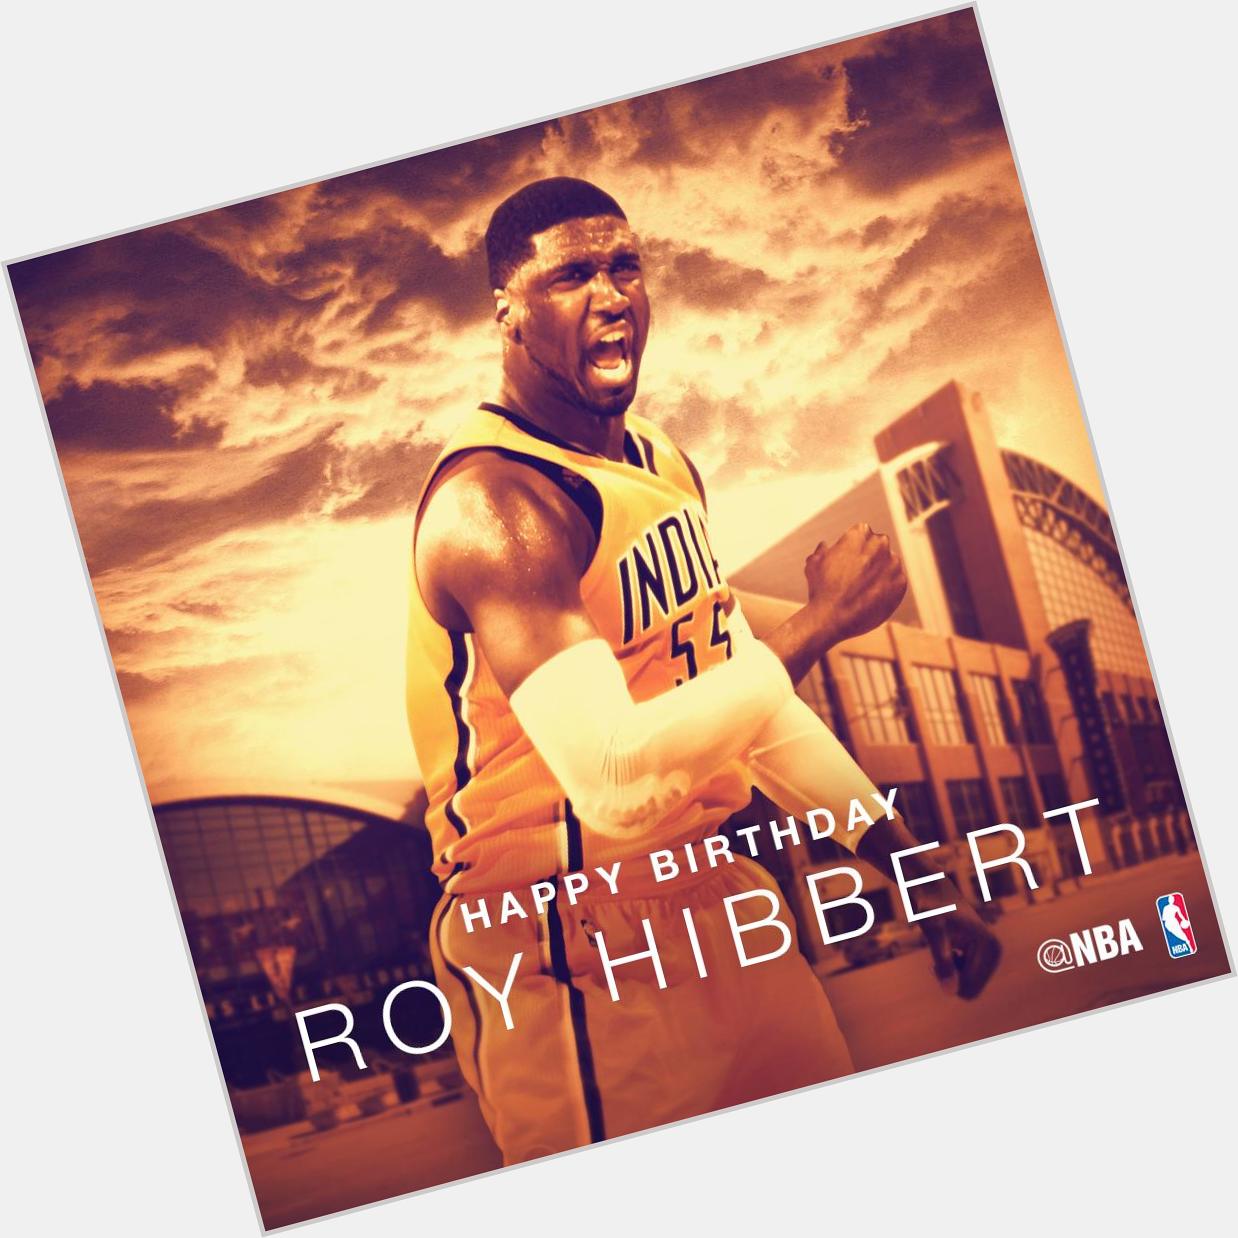 Join us in wishing Roy Hibbert of the Indiana Pacers a HAPPY BIRTHDAY! 